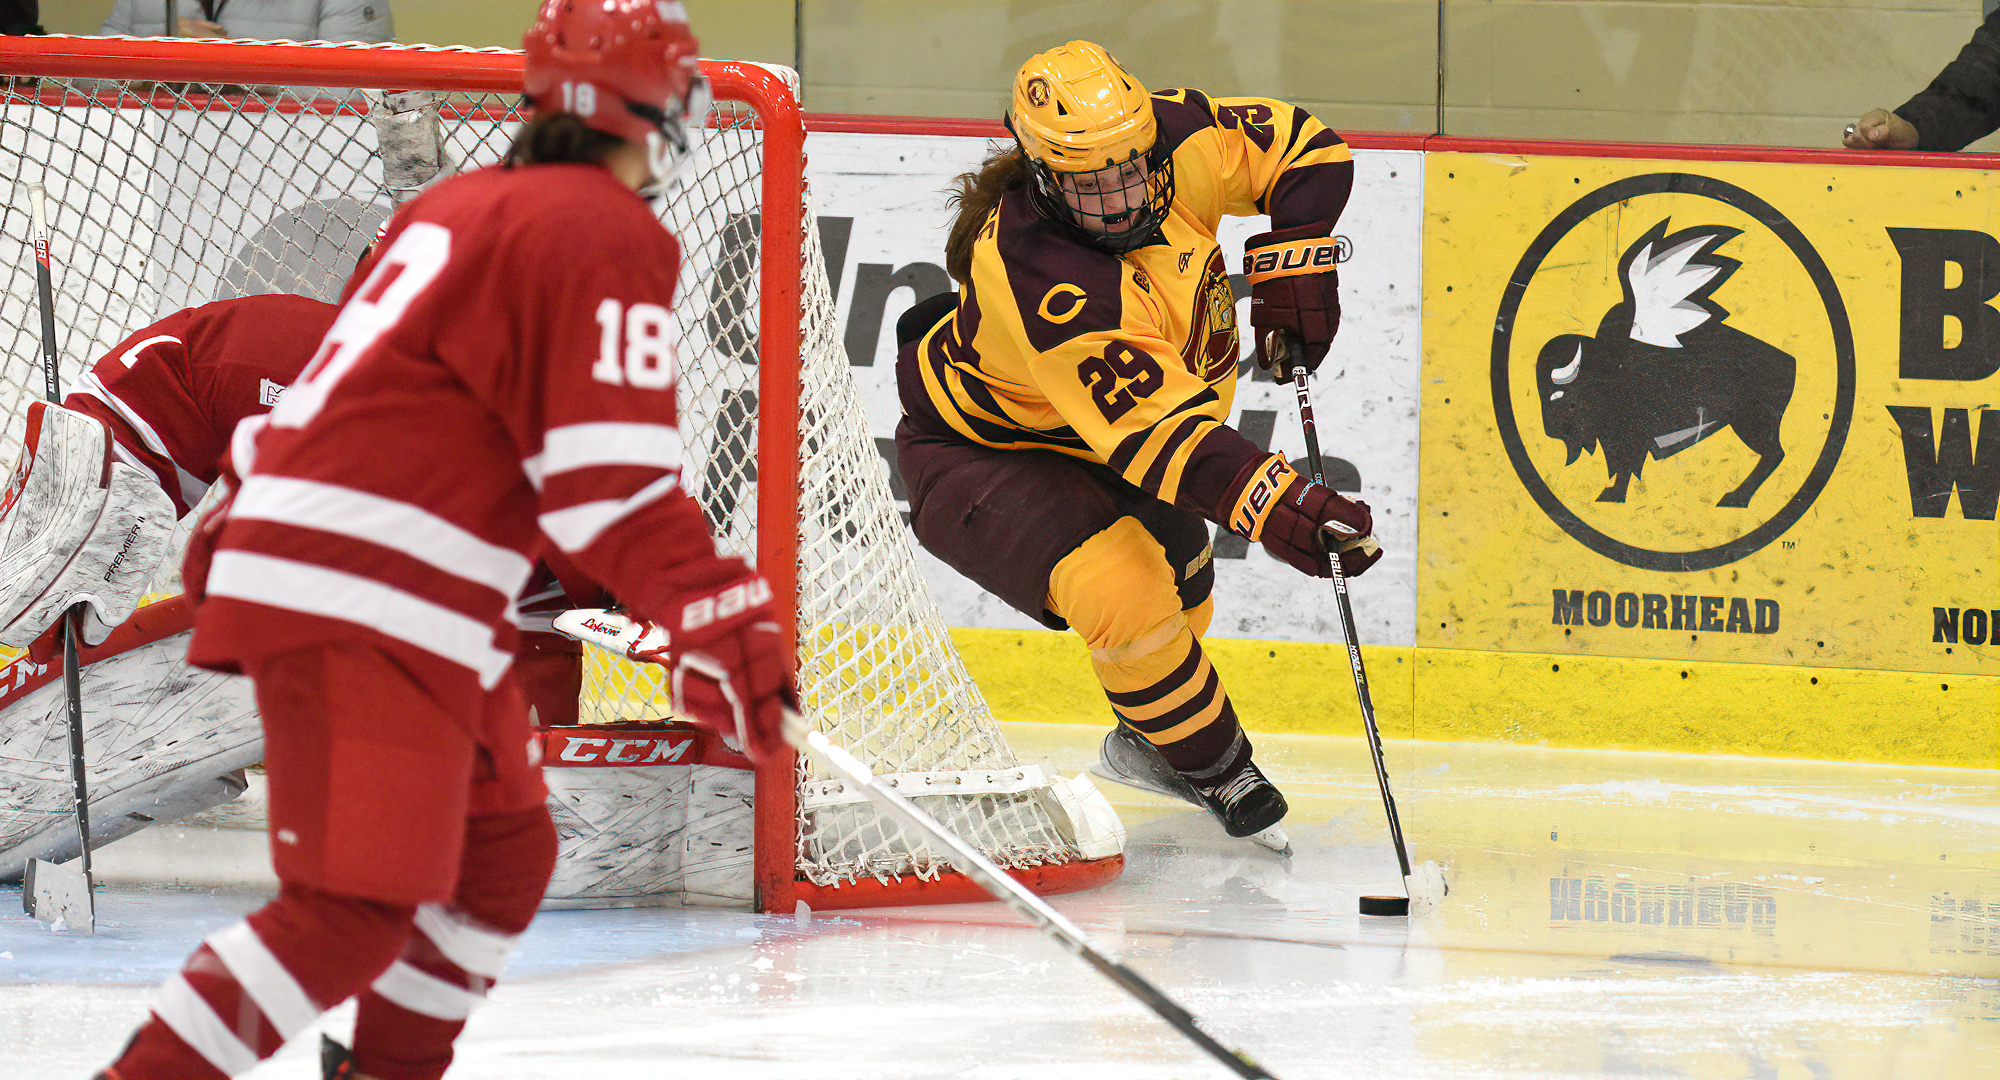 Junior Jerica Friese scored both of the Cobbers' goals in the team's series finale at St. Catherine. She now has a team-leading six goals for the year.